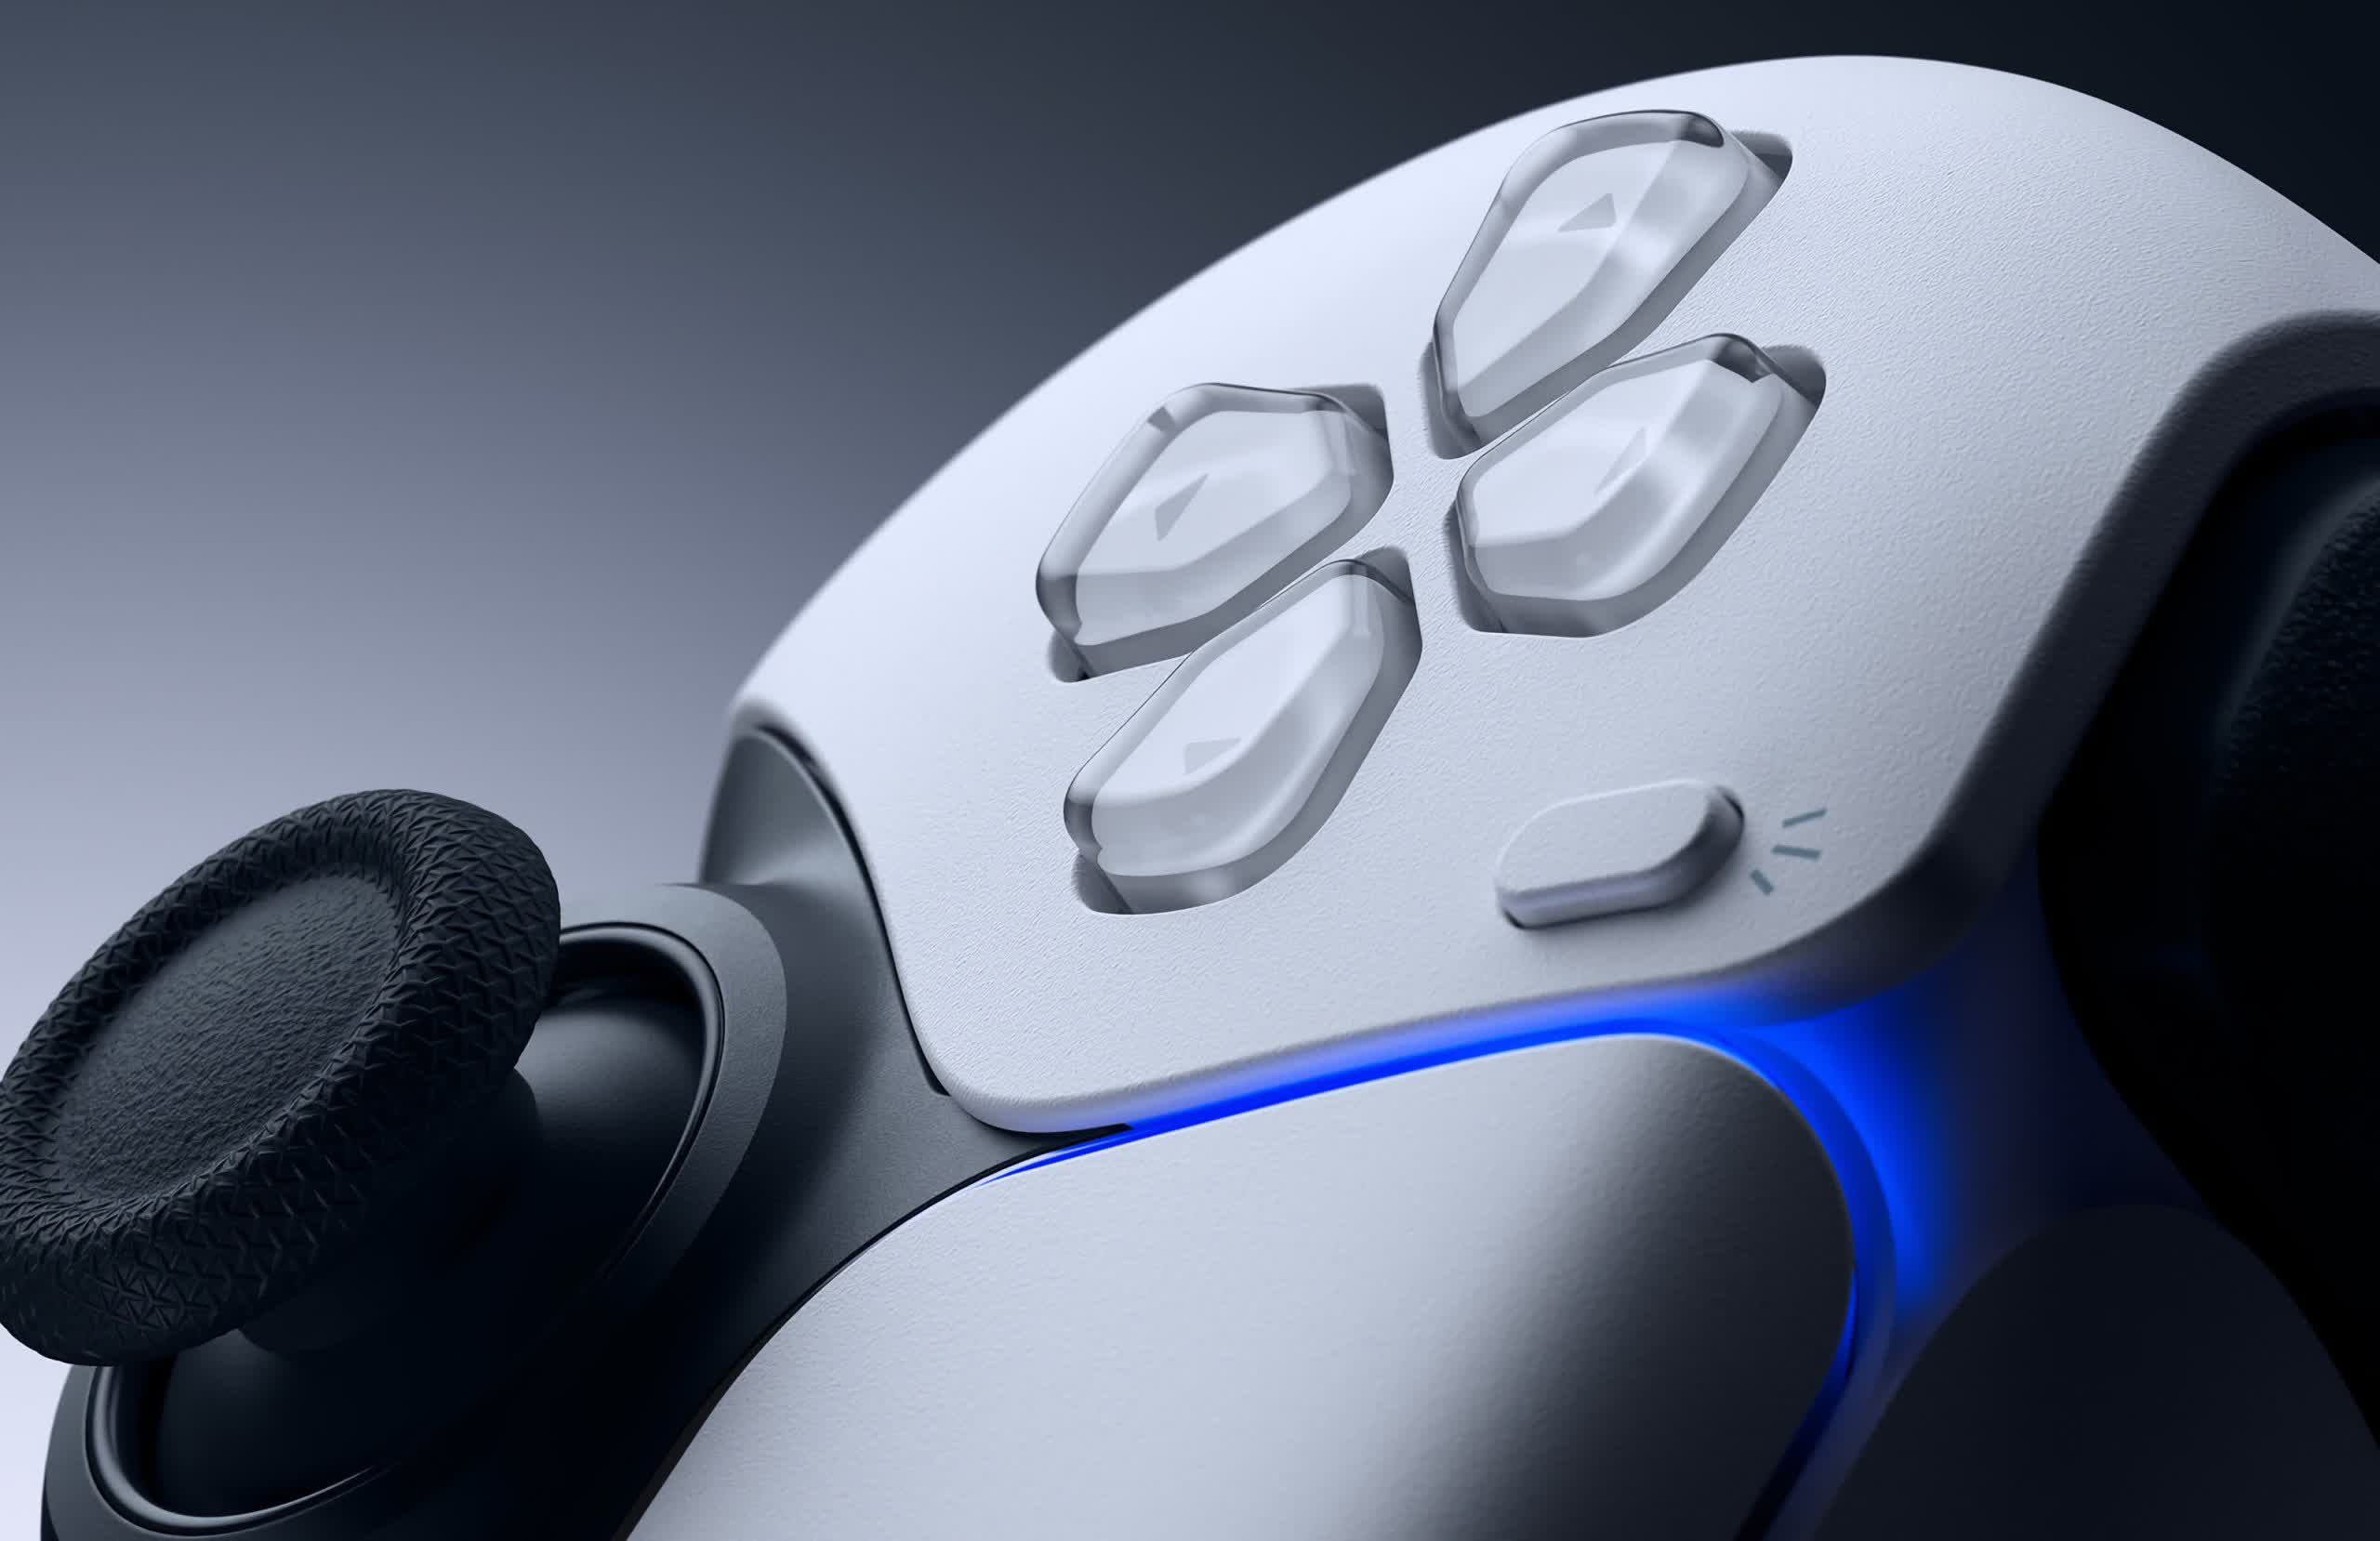 Steam will soon tell you which games natively support PlayStation controllers